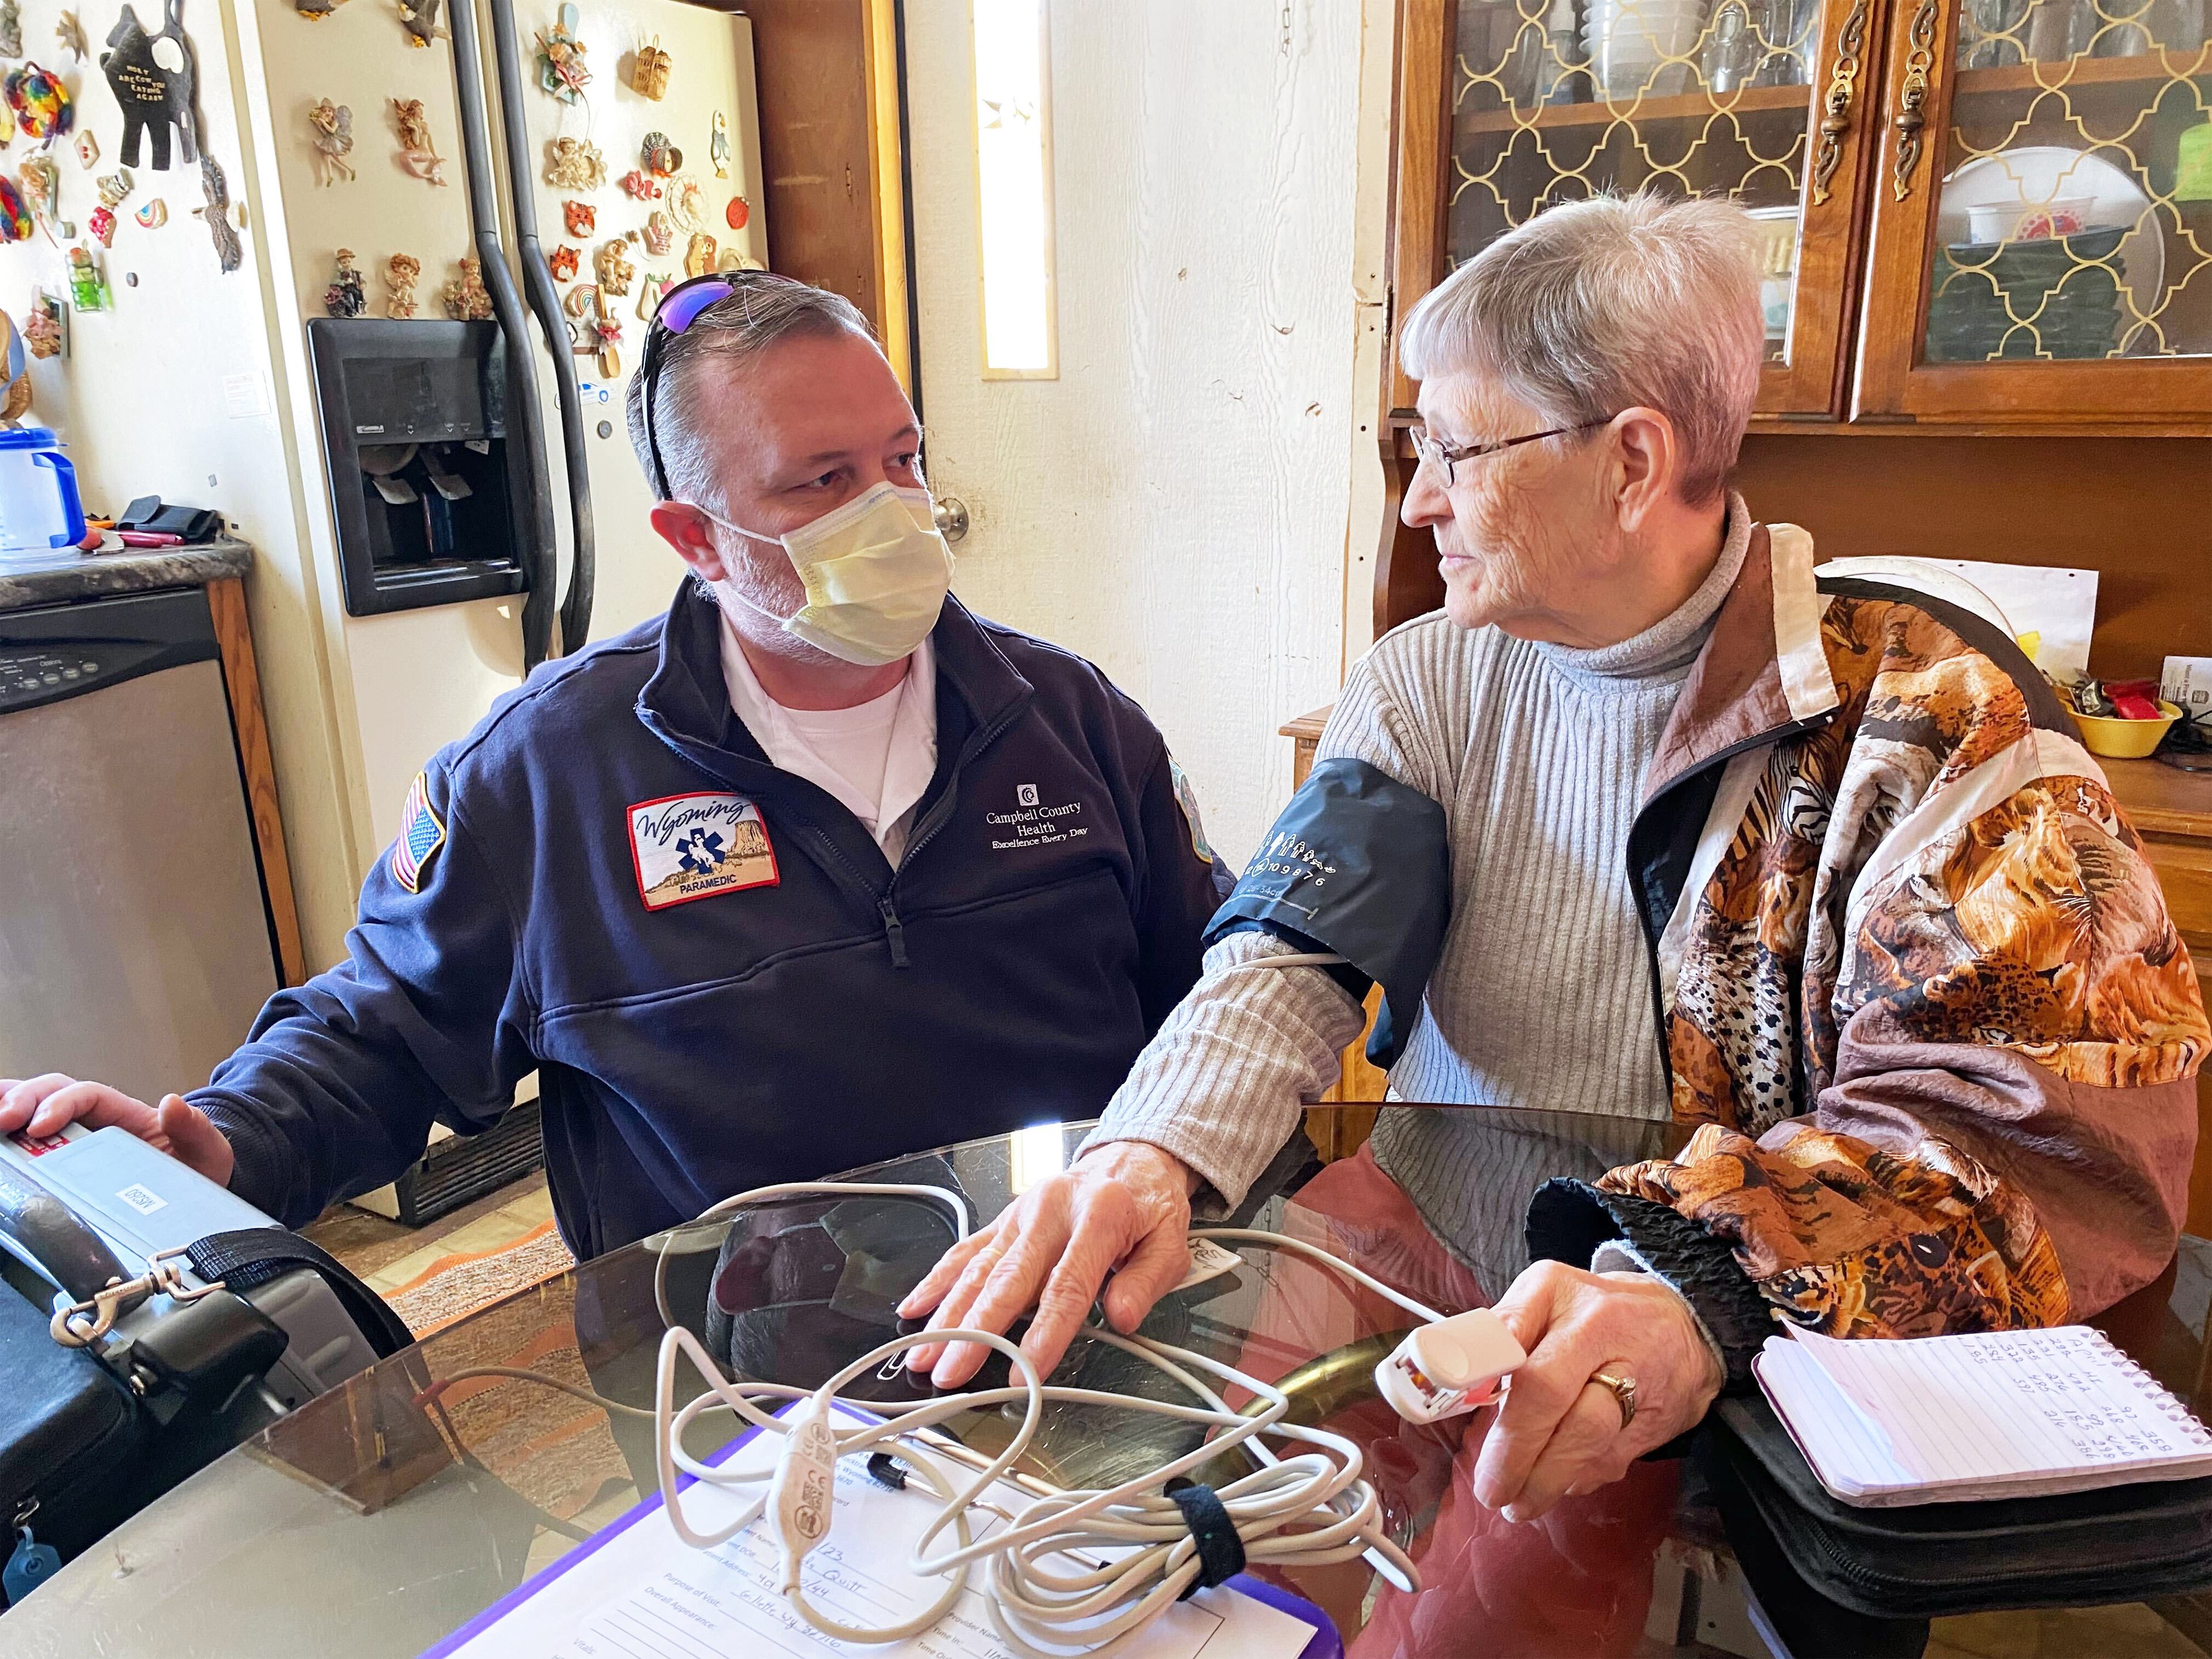 A photo of a paramedic checking a woman's pulse in her home.